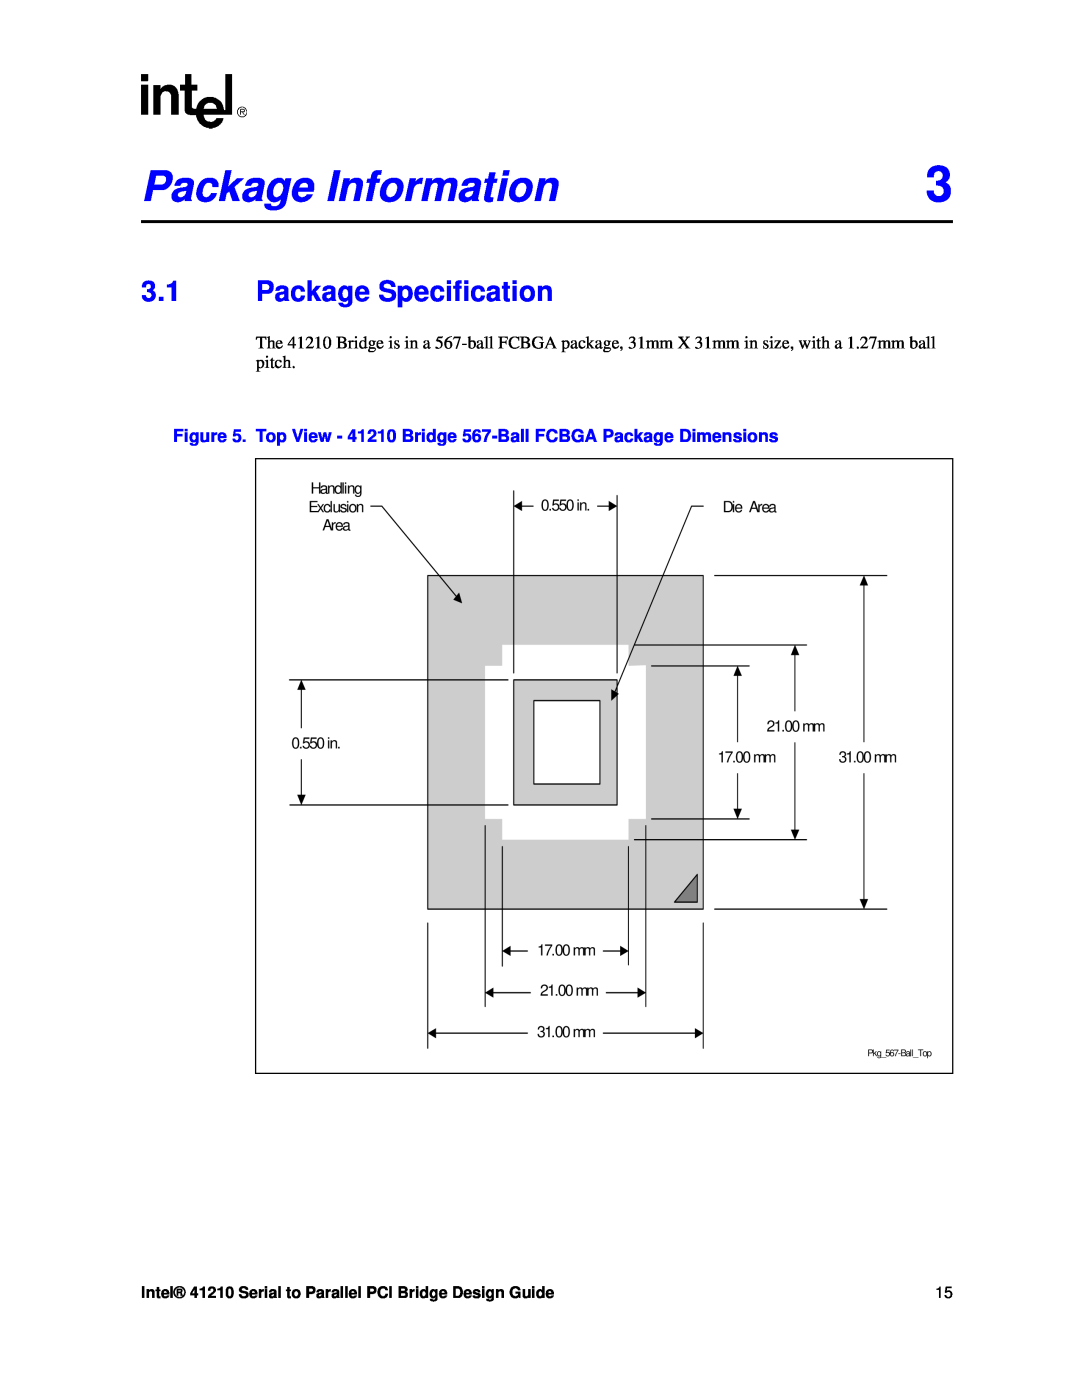 Intel manual Package Information, Package Specification, Top View - 41210 Bridge 567-Ball FCBGA Package Dimensions 